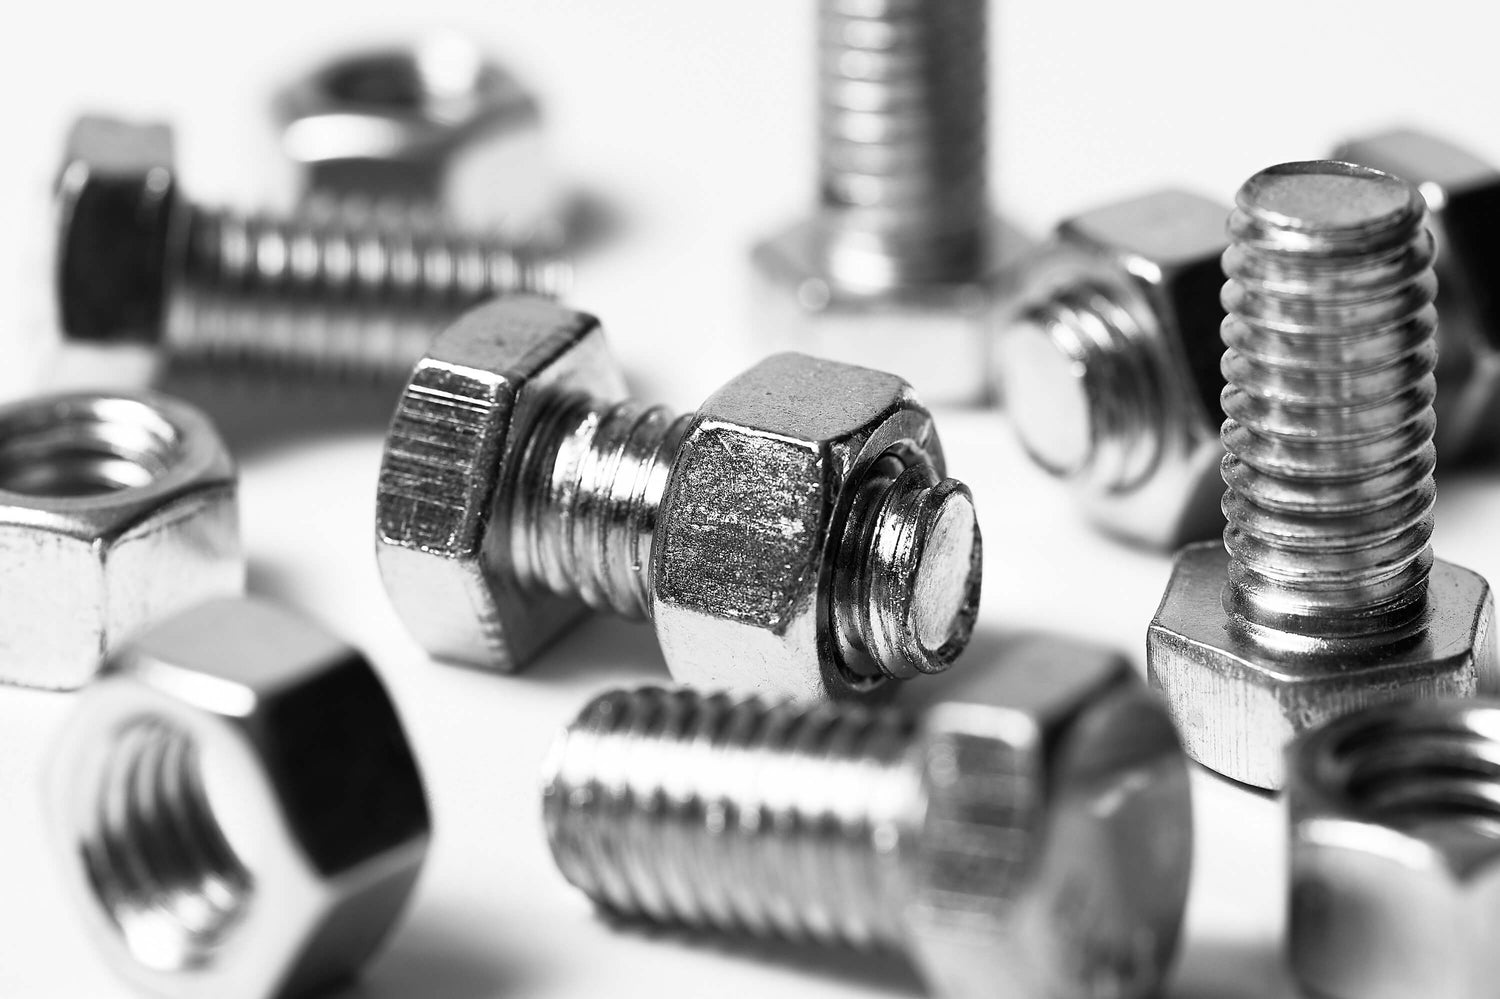 CANADA BOLTS ONLINE SUPPLIER OF SCREWS, NUTS, BOLTS & WASHERS